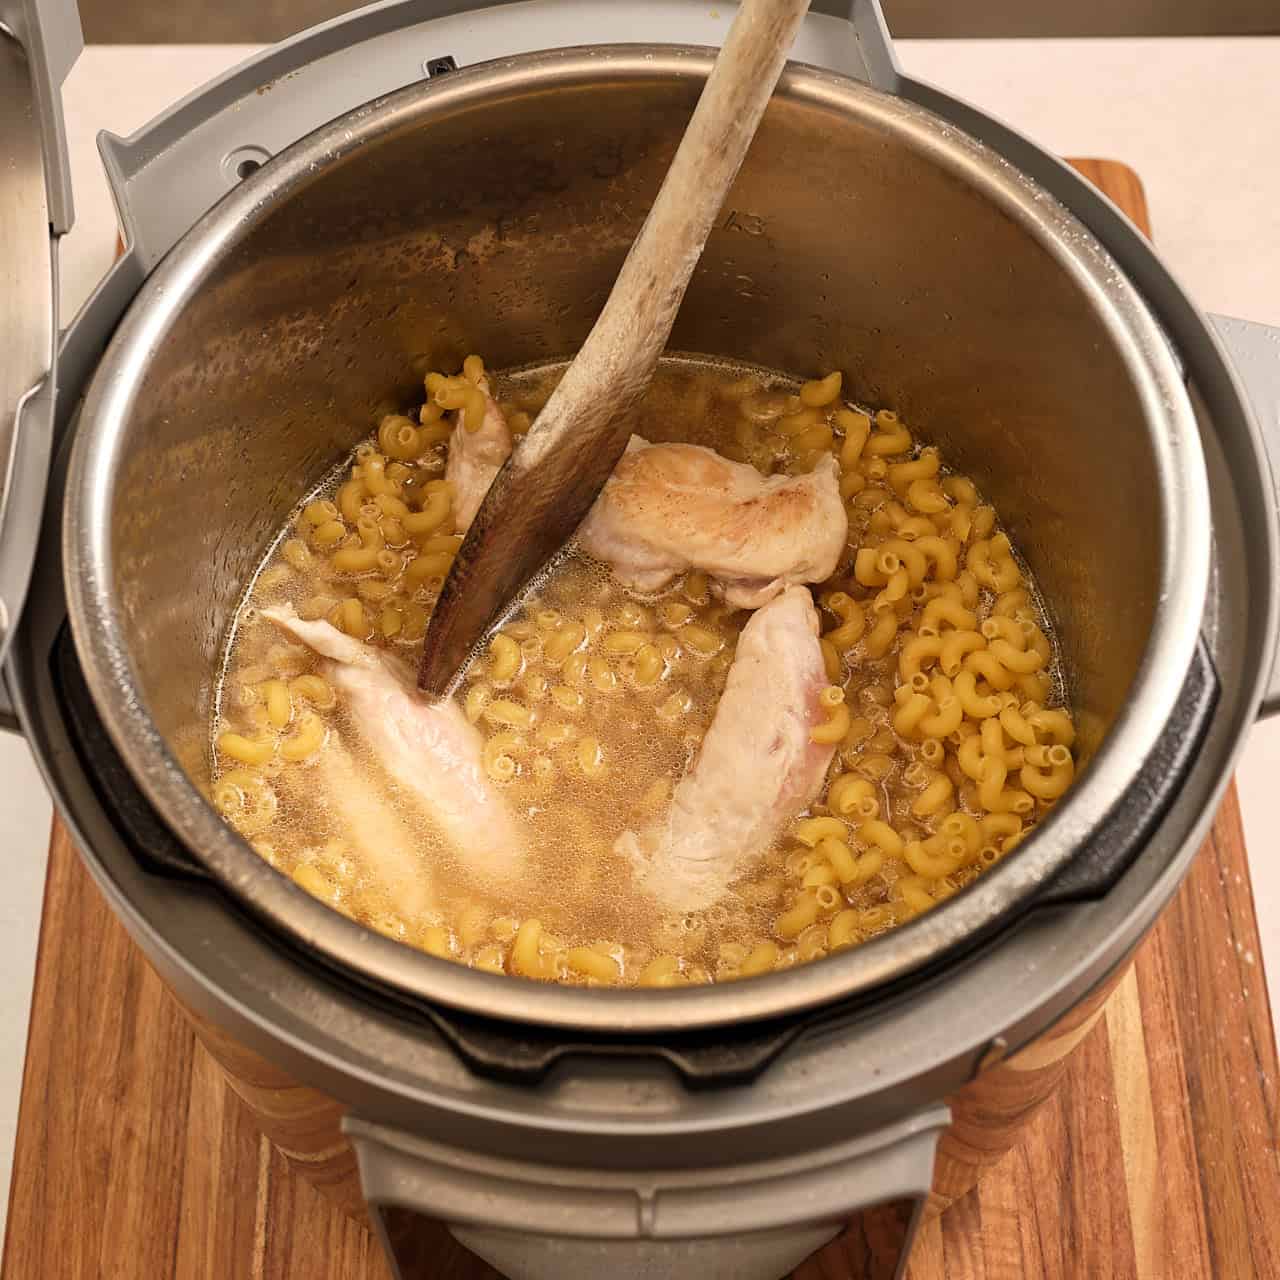 An Instant Pot with noodles, broth, and chicken ready to cook